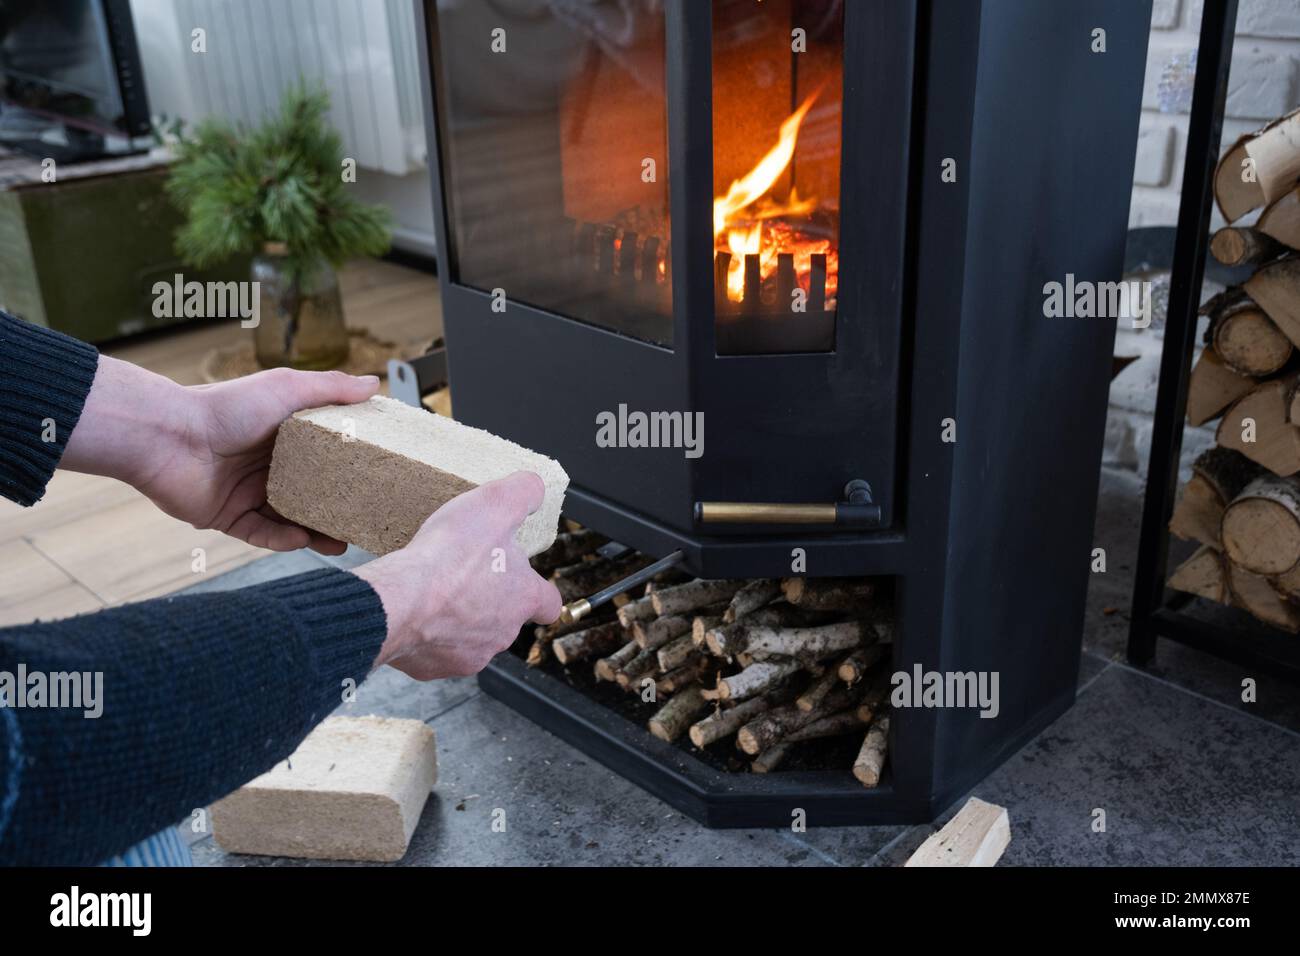 Hands kindle the hearth with economical briquettes. Fuel briquettes made of pressed sawdust for kindling the furnace - economical alternative eco-frie Stock Photo